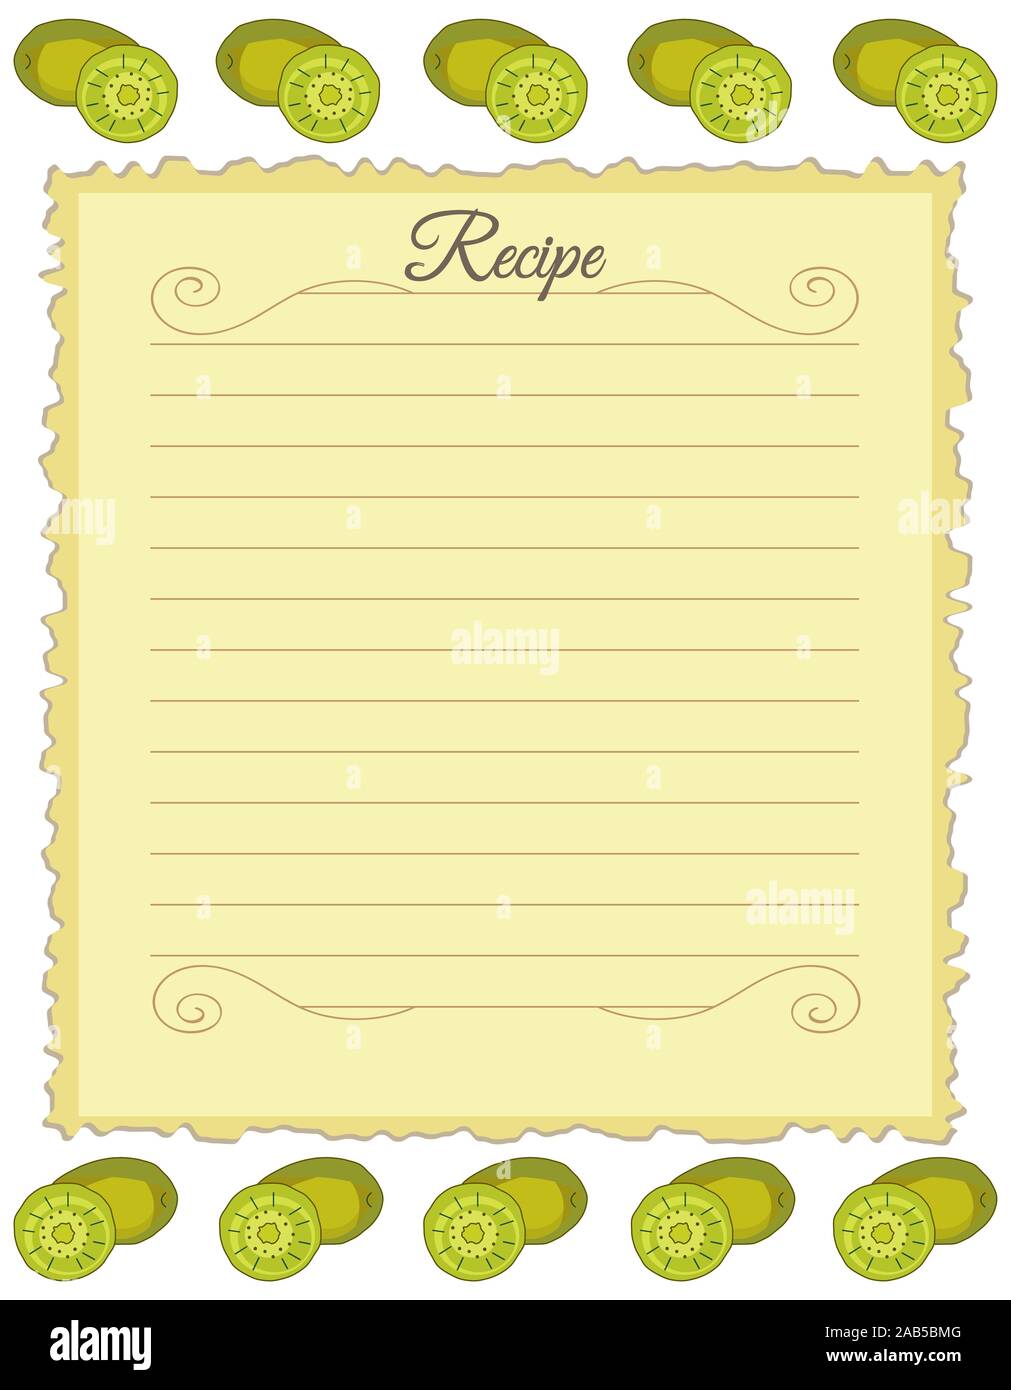 Paper for recipes. Form for recipes. Notebook paper with kiwi ornament. Vintage paper Stock Vector